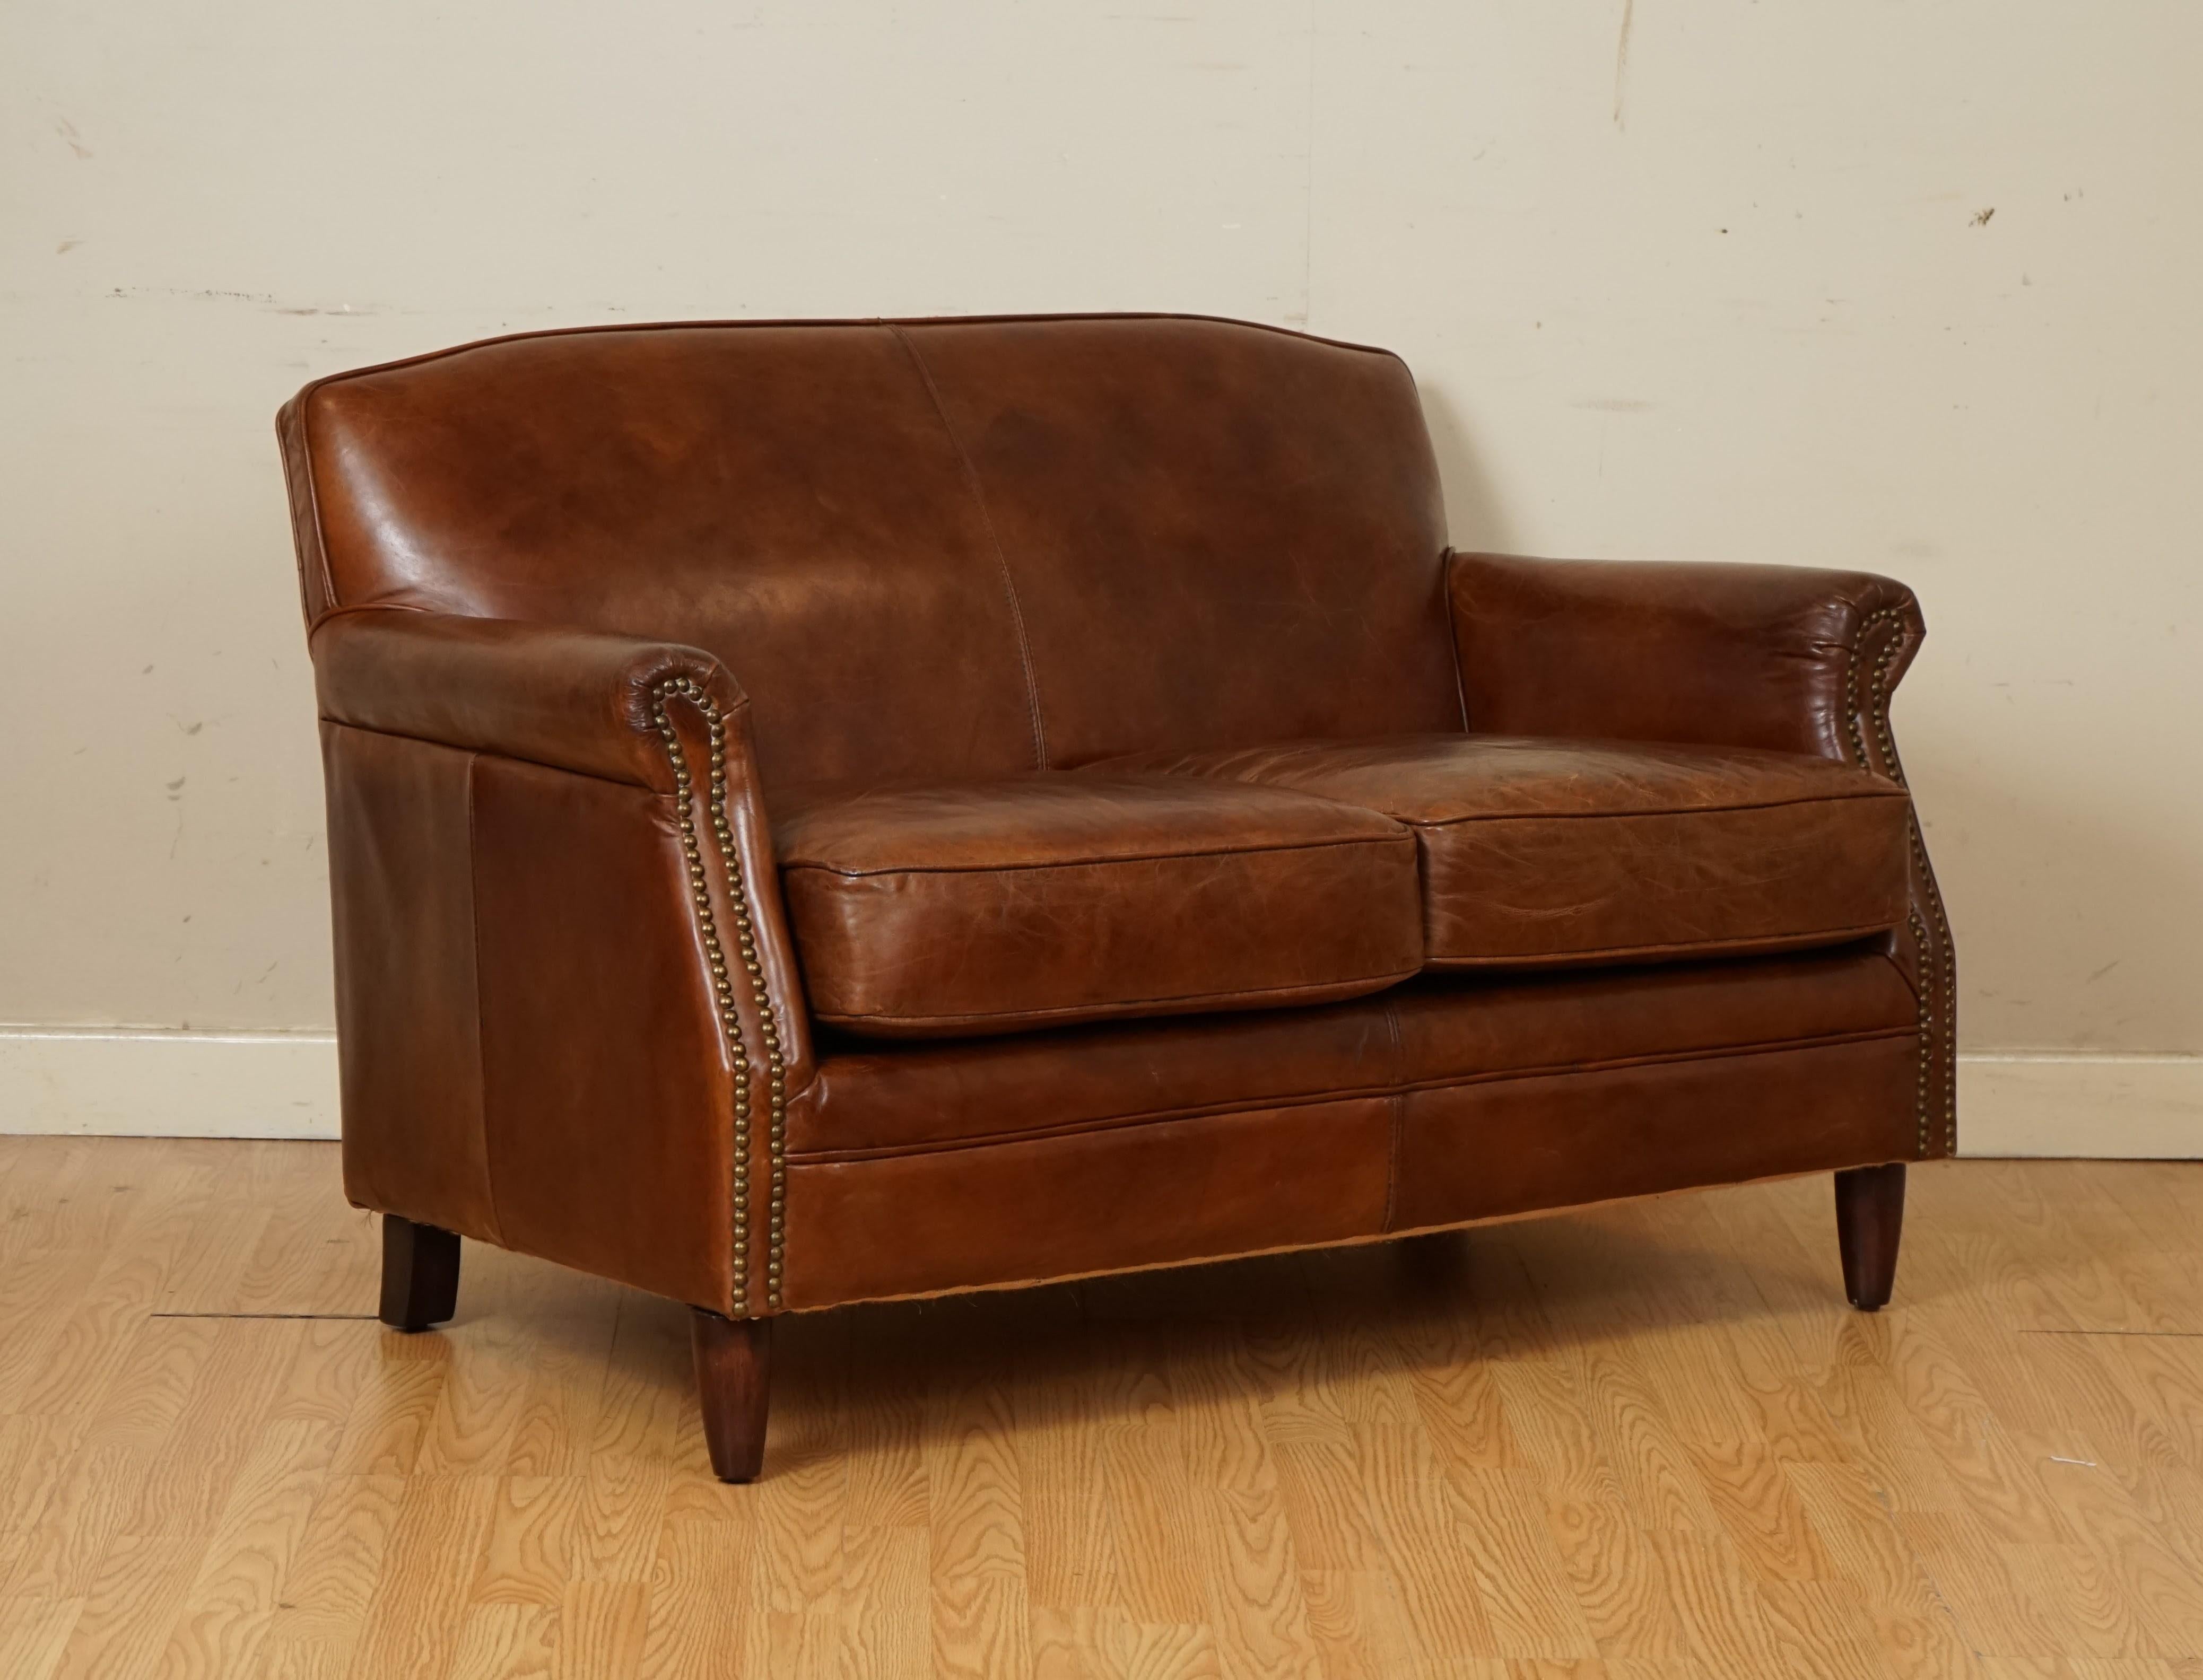 We are so excited to present to you this Gorgeous Vintage Cigar Brown Leather Small Two Seater Sofa.

This sofa is perfect if you want something compact and petite, it would be a perfect sofa to put in your bedroom. It pretty much fits anywhere.